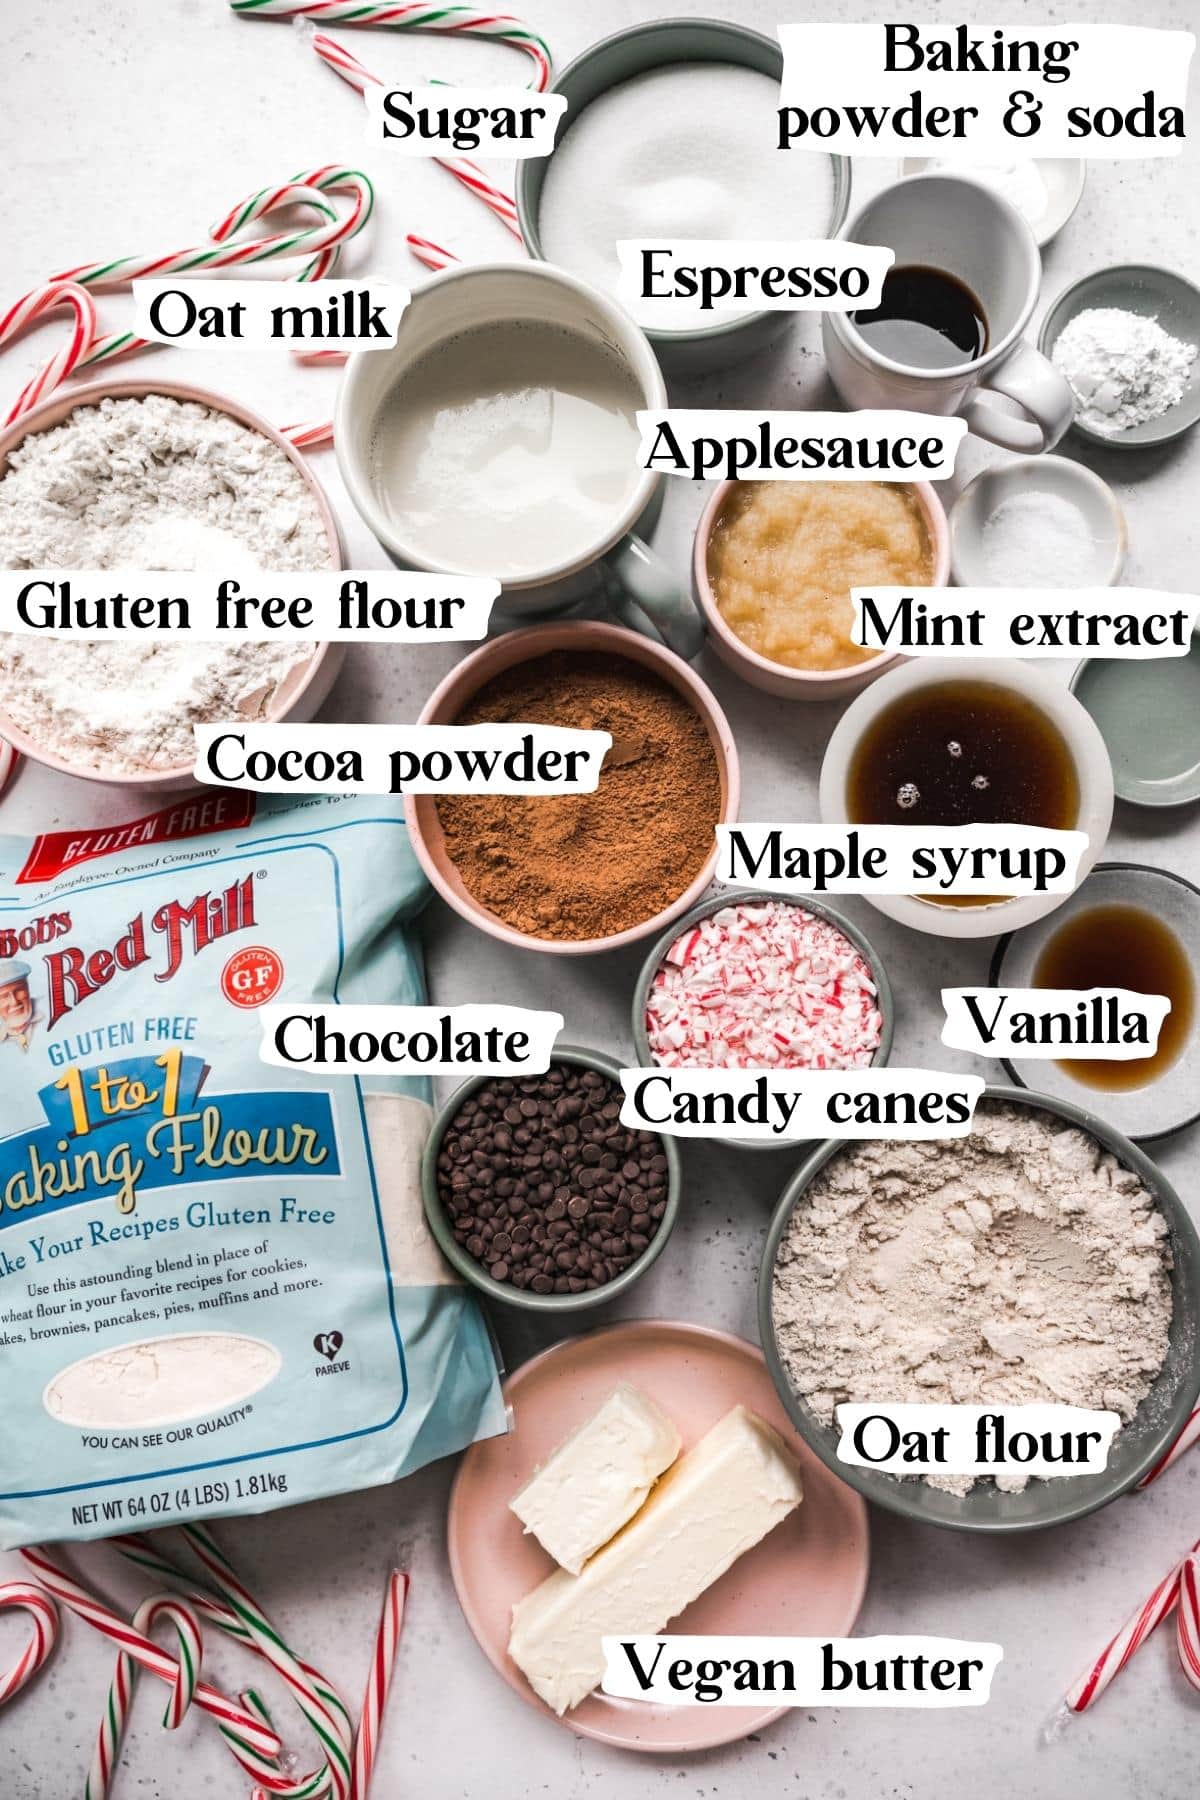 Overhead shot of chocolate peppermint cake ingredients, including sugar, cocoa powder, and candy canes.